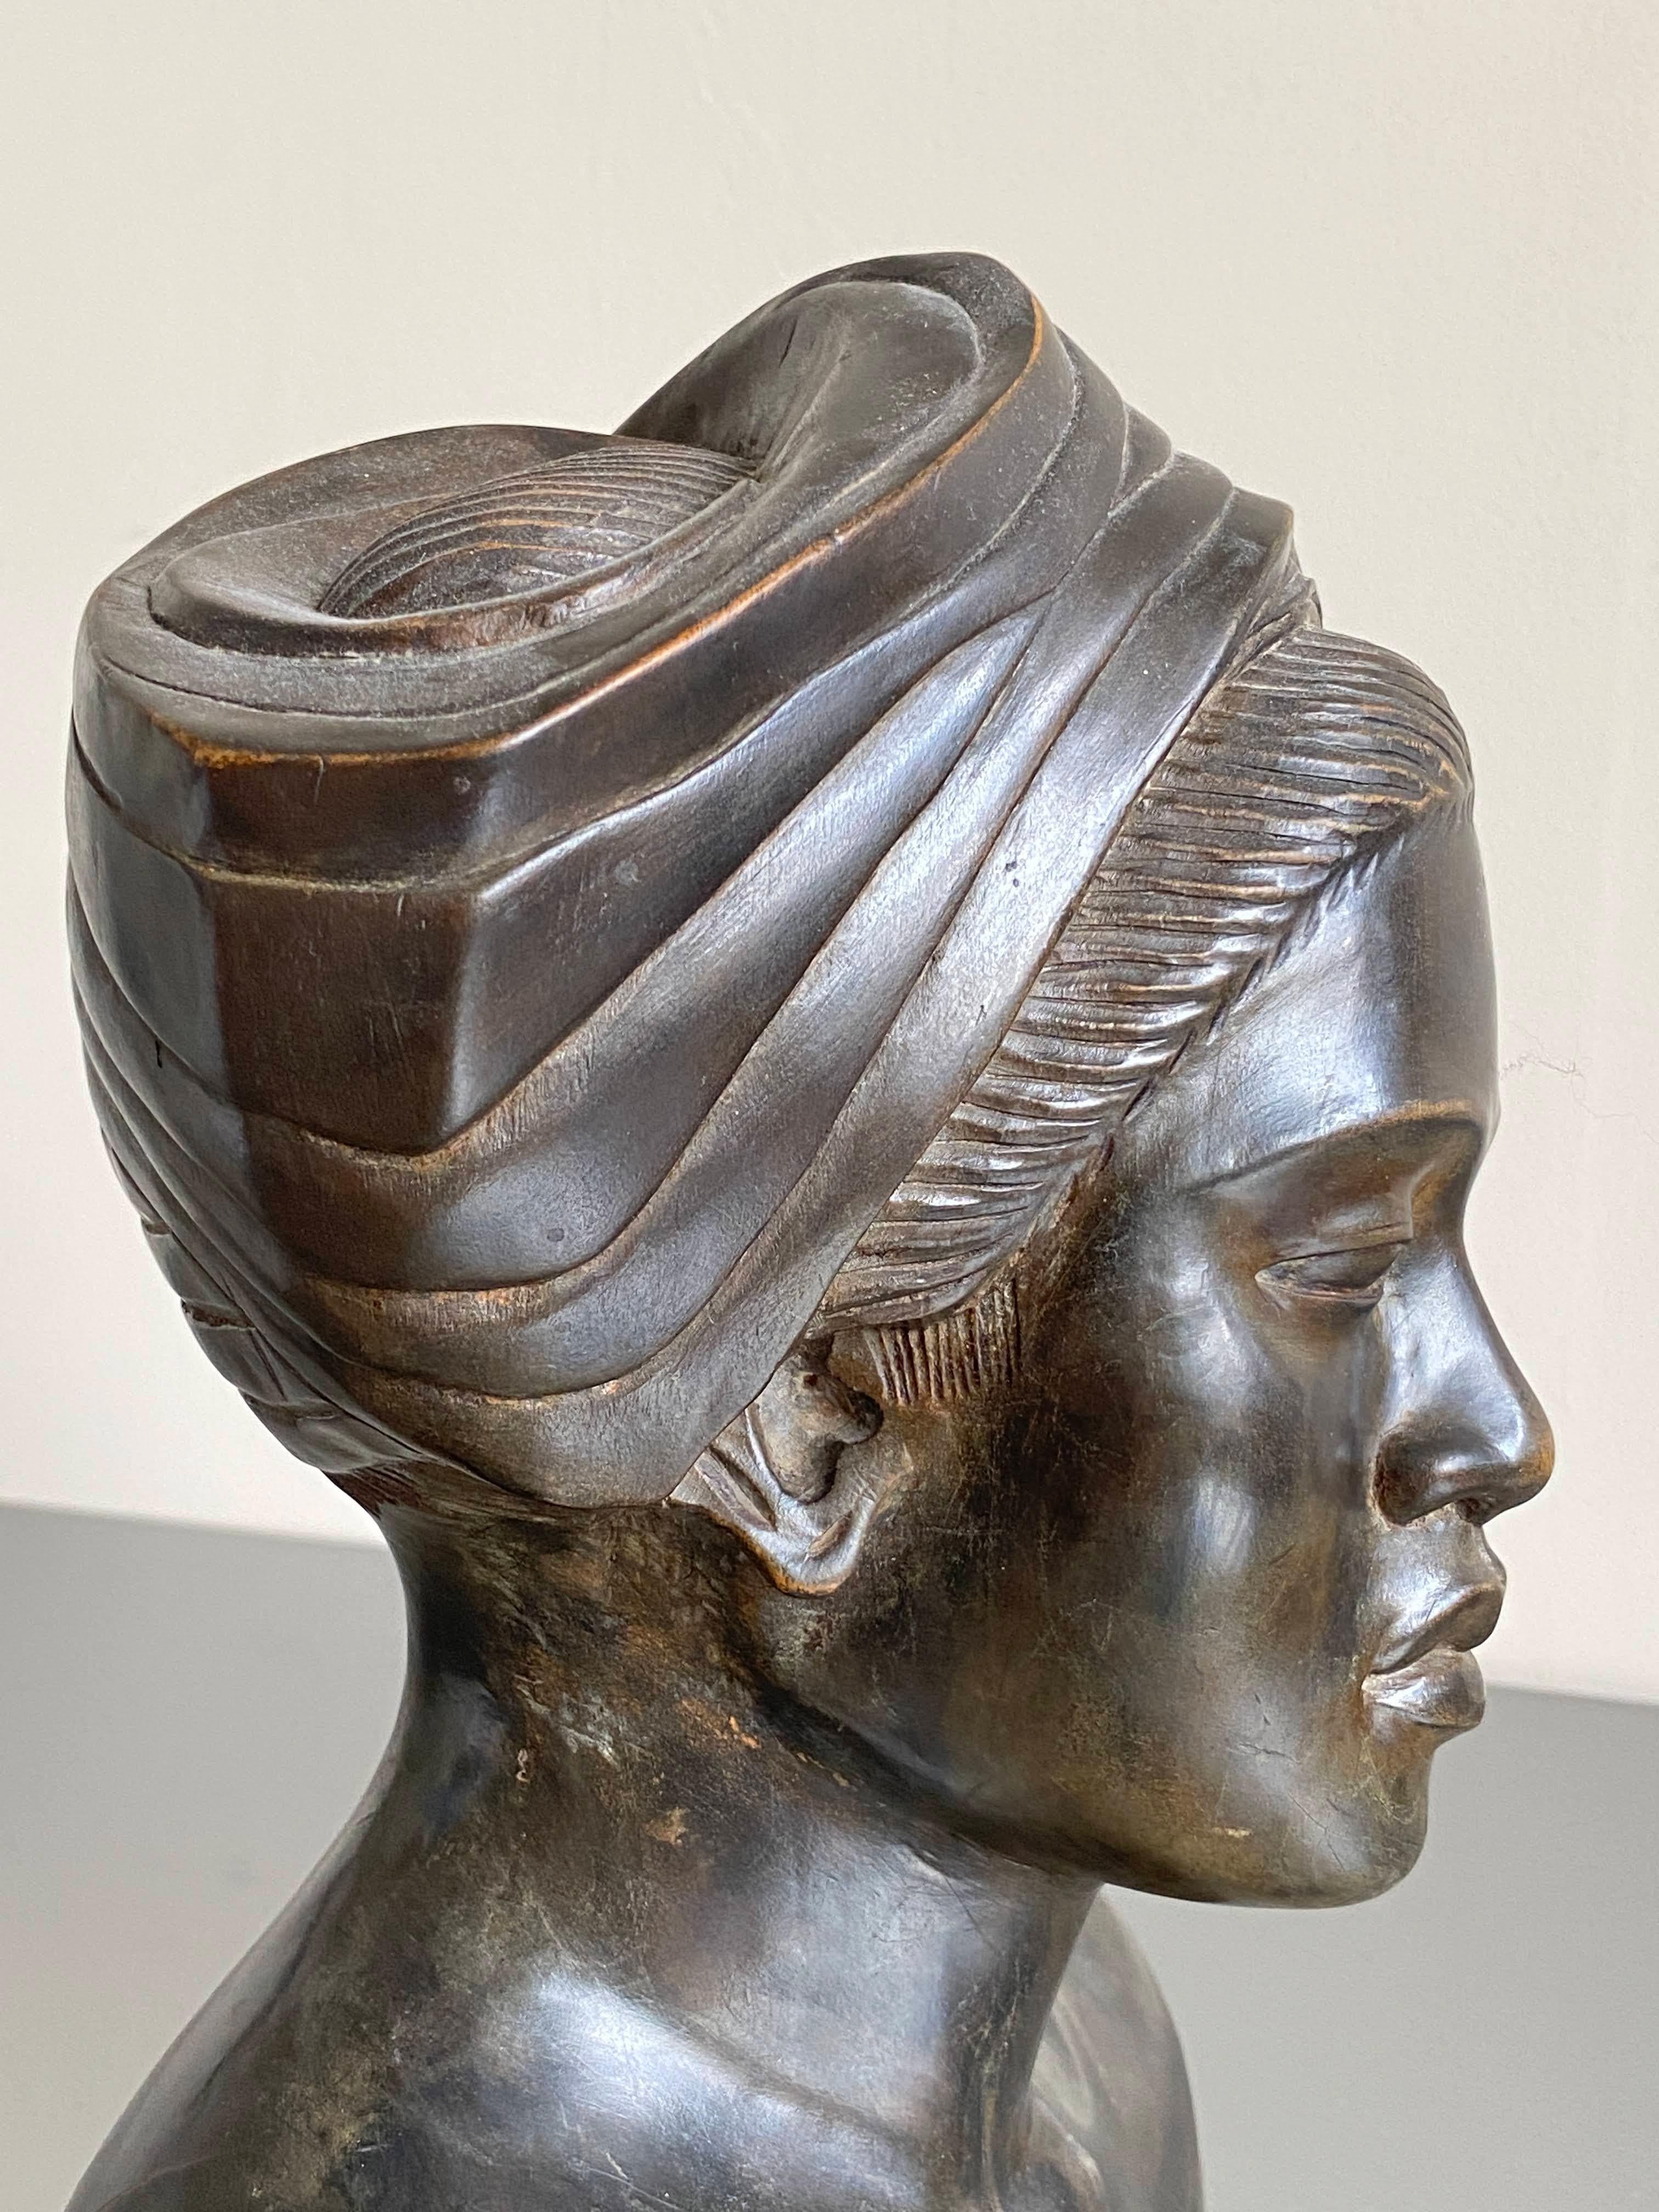 20th Century 20th C. African Hardwood Carving of a Woman Wearing Headdress, circa 1930